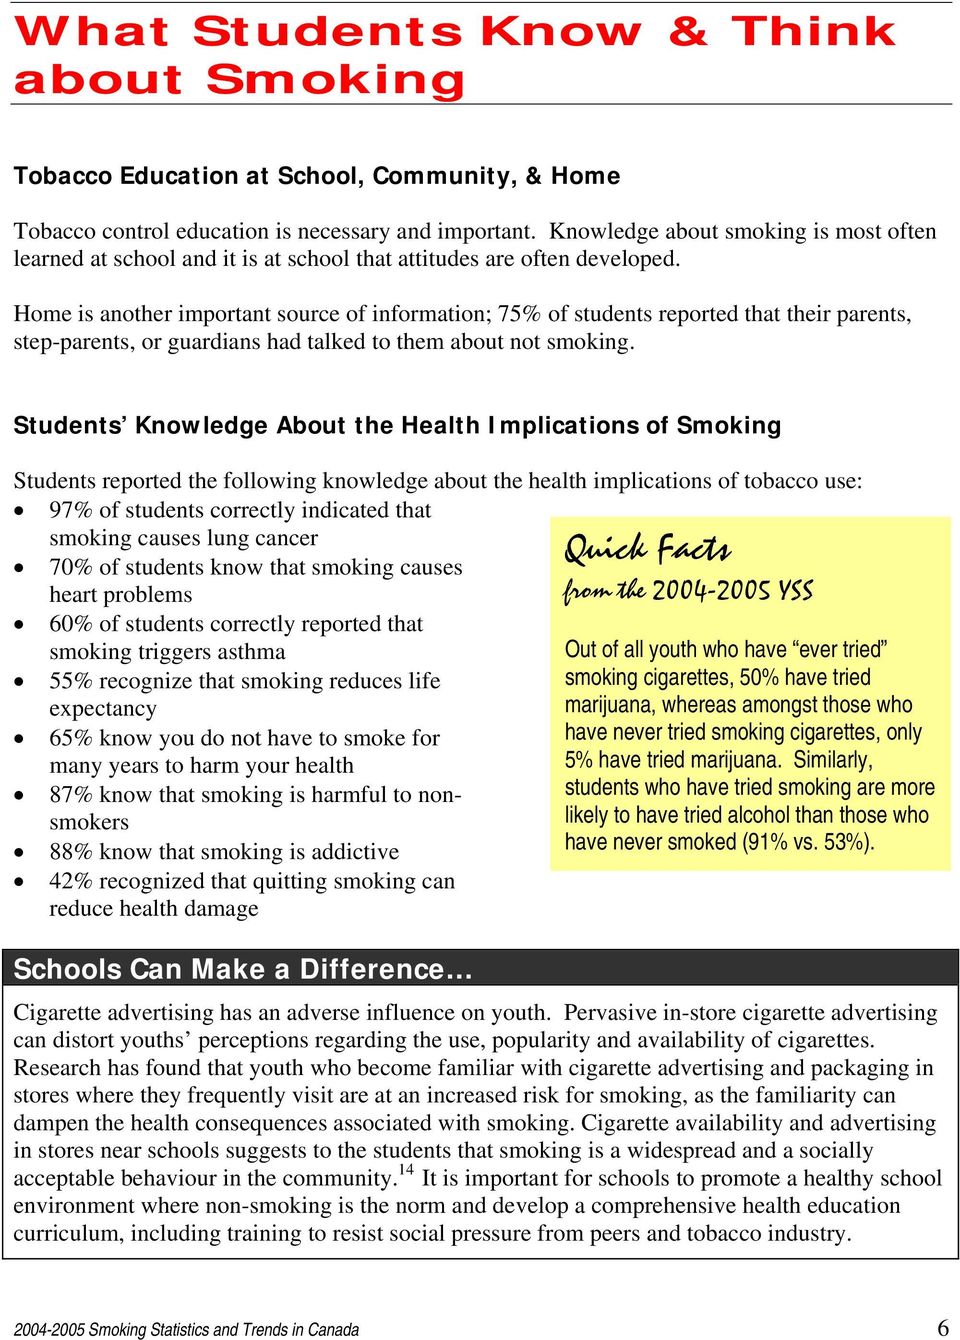 Home is another important source of information; 75% of students reported that their parents, step-parents, or guardians had talked to them about not smoking.